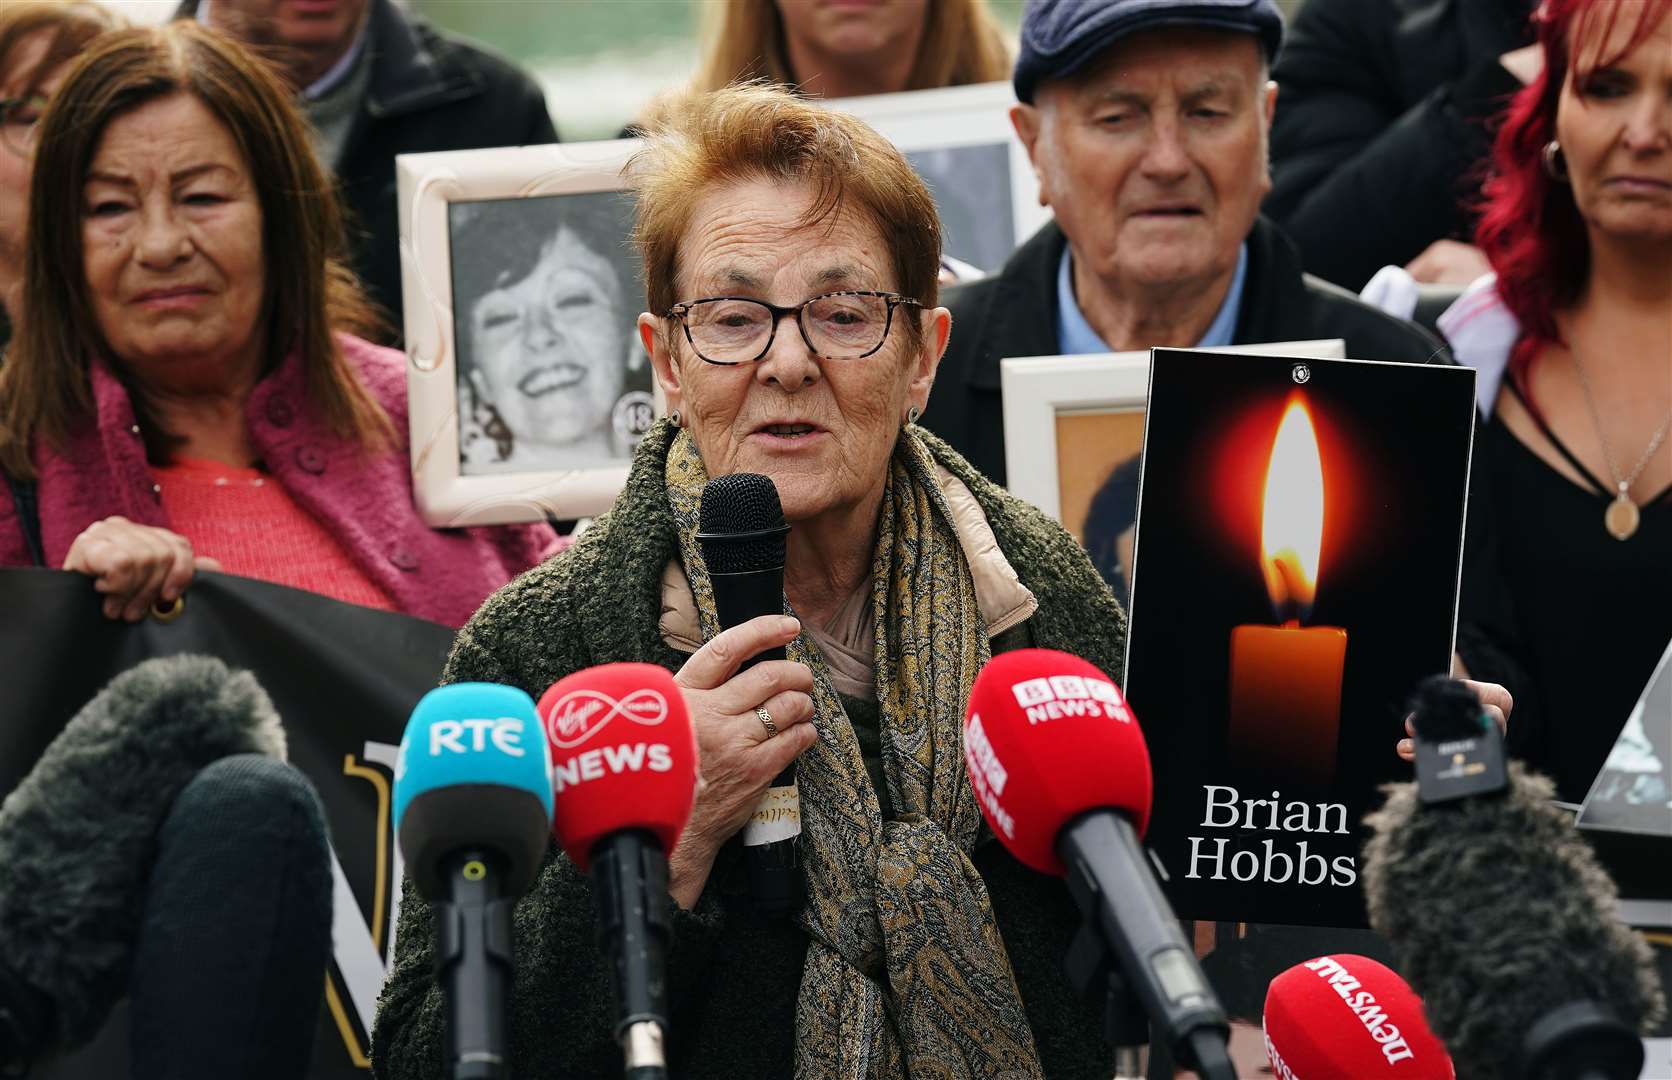 Pat Dunne spoke about her brother Brian Hobbs, who died in the fire (Brian Lawless/PA)